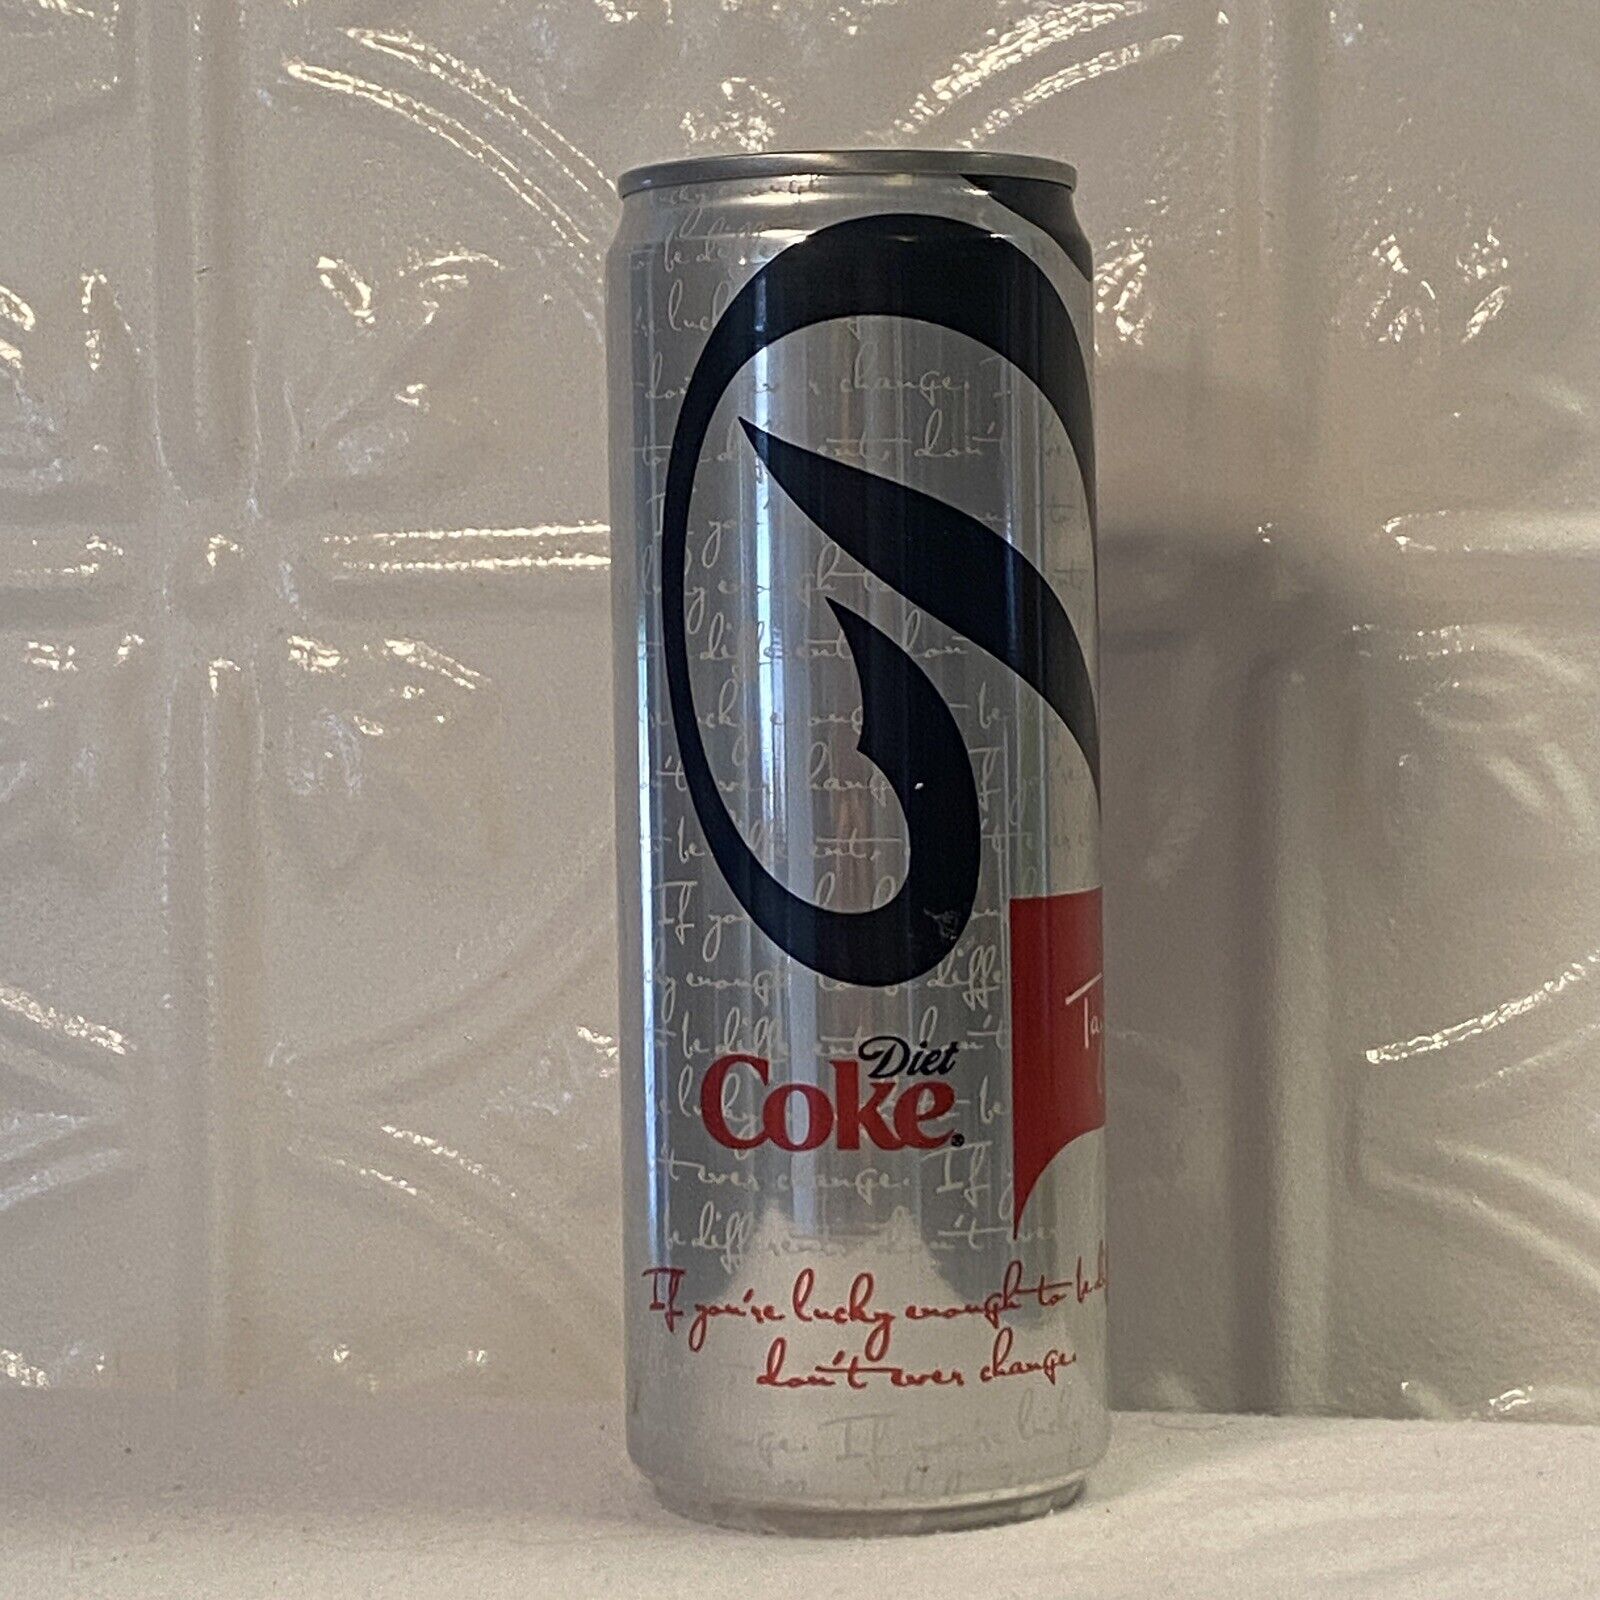 Taylor Swift Slim Diet Coke 2013 Collectors Edition Can  - UNOPENED